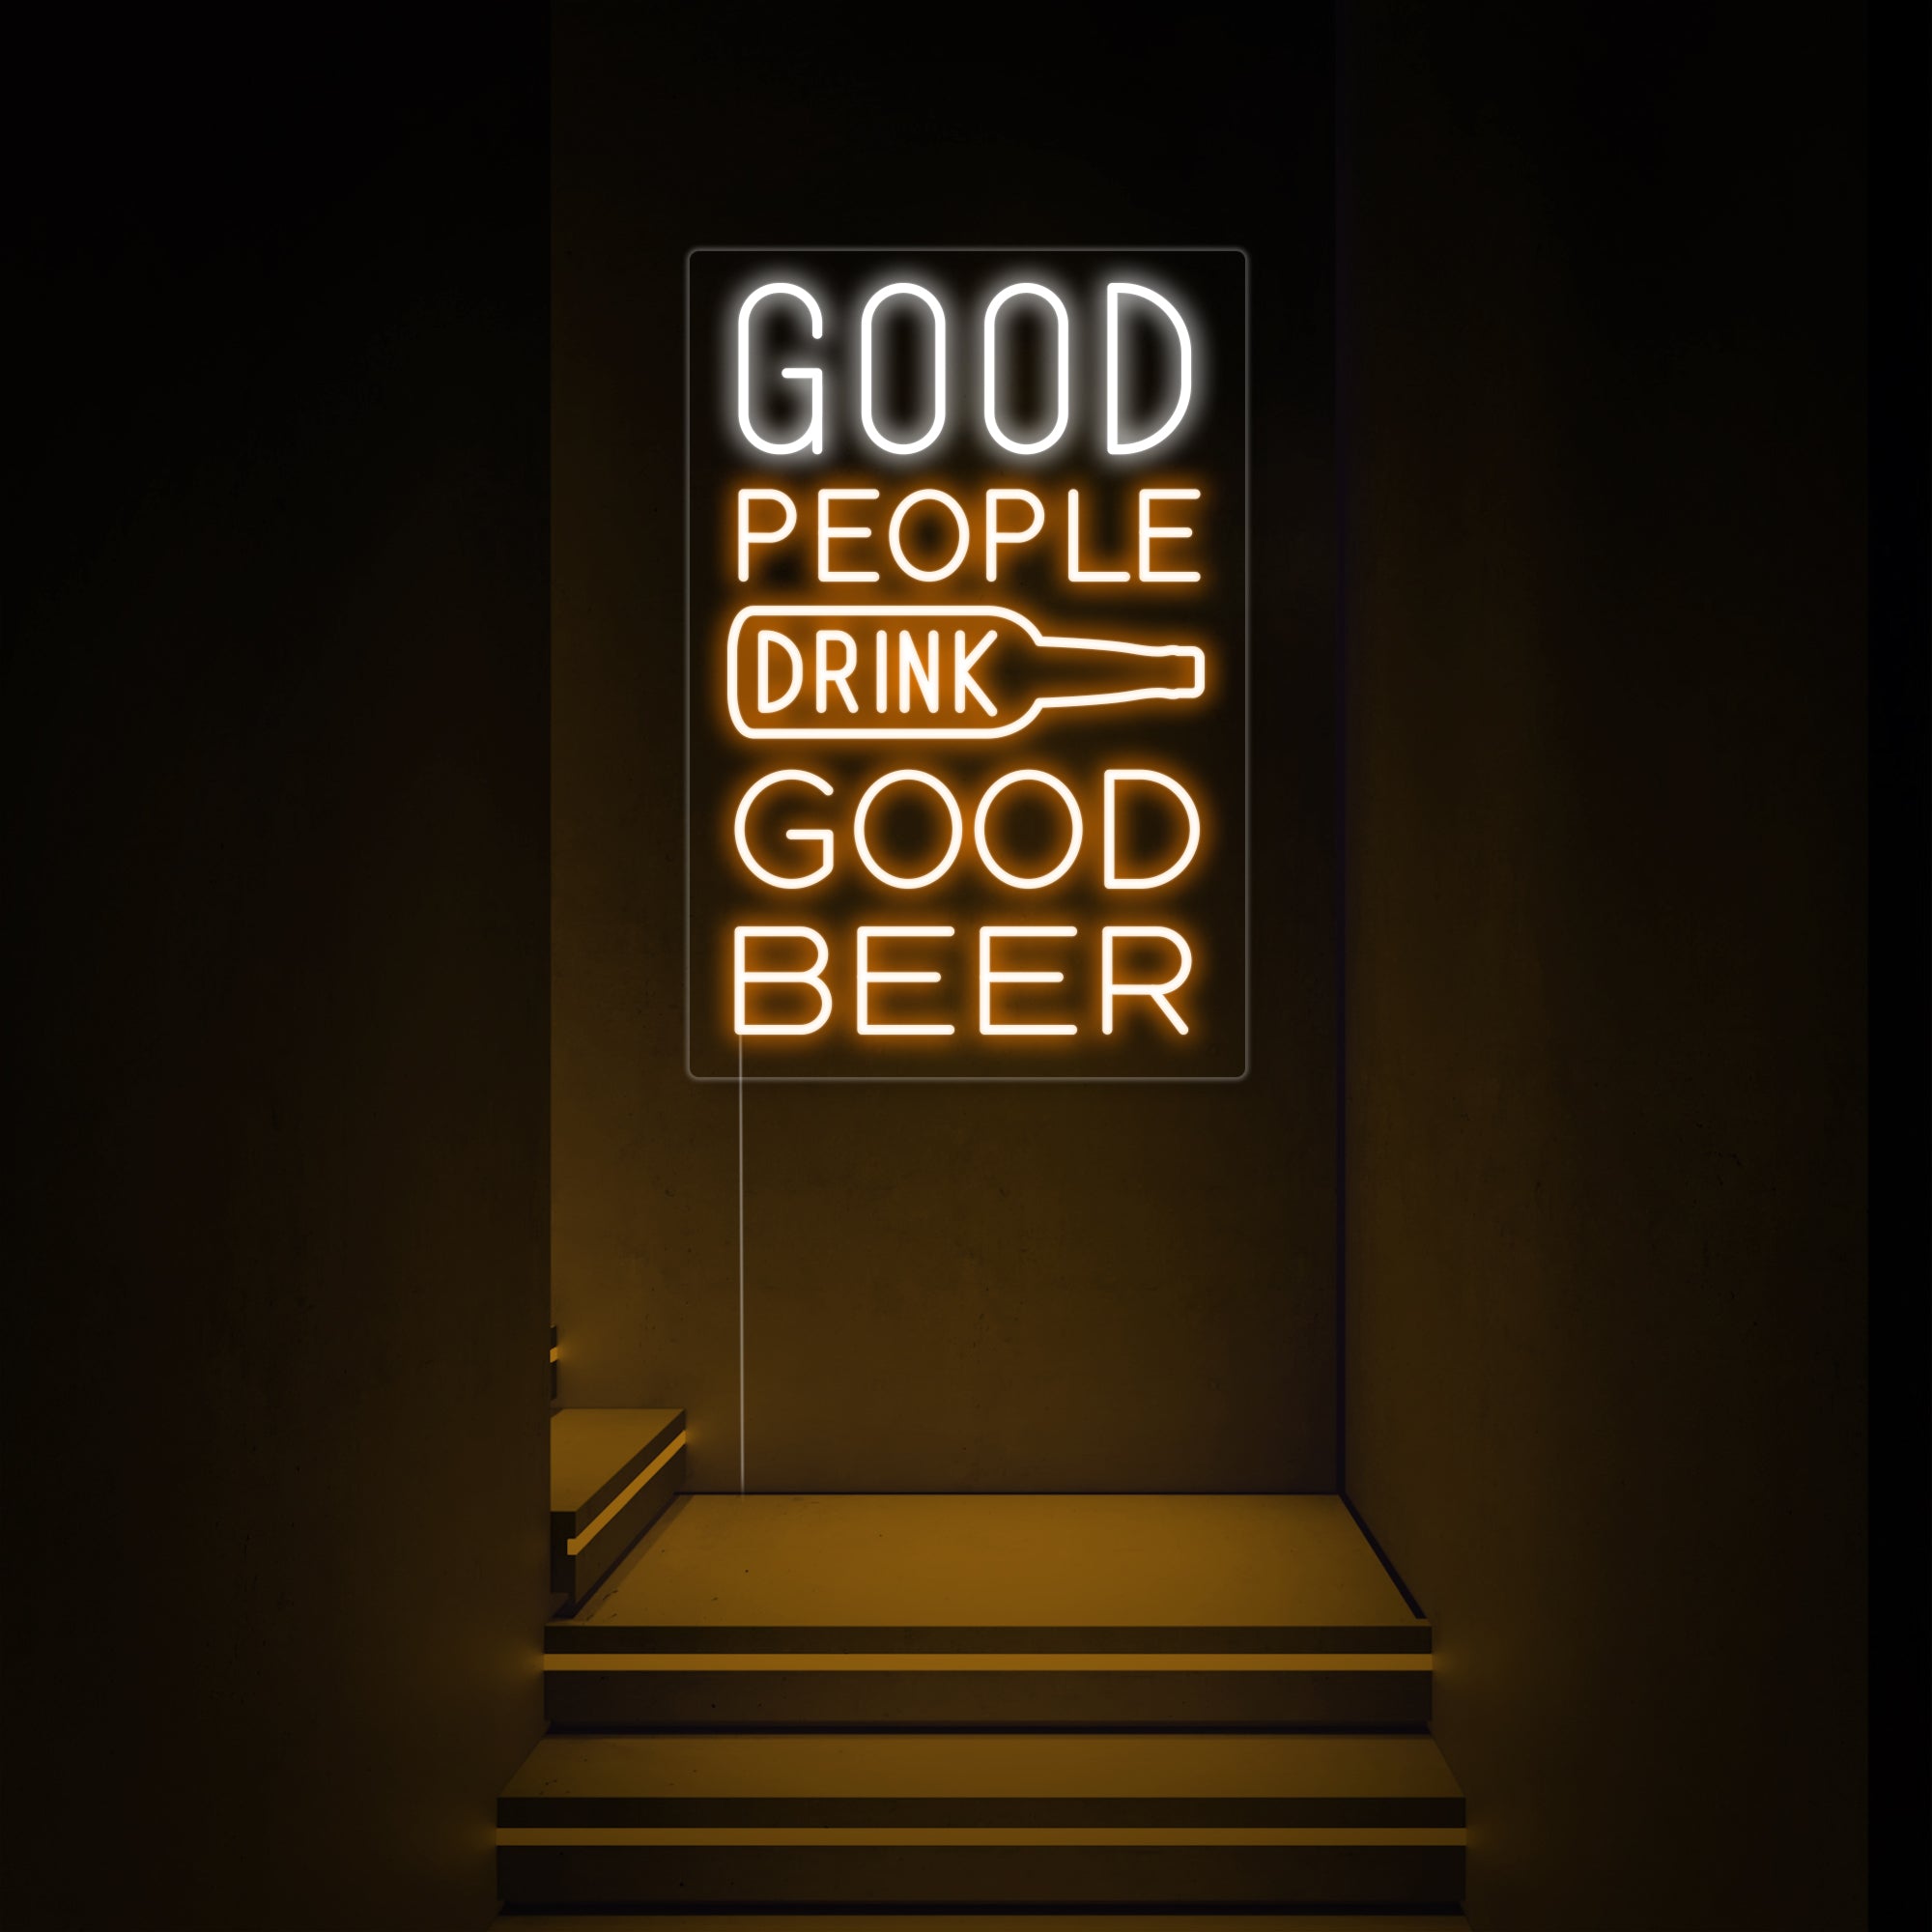 Good People for Good Beer